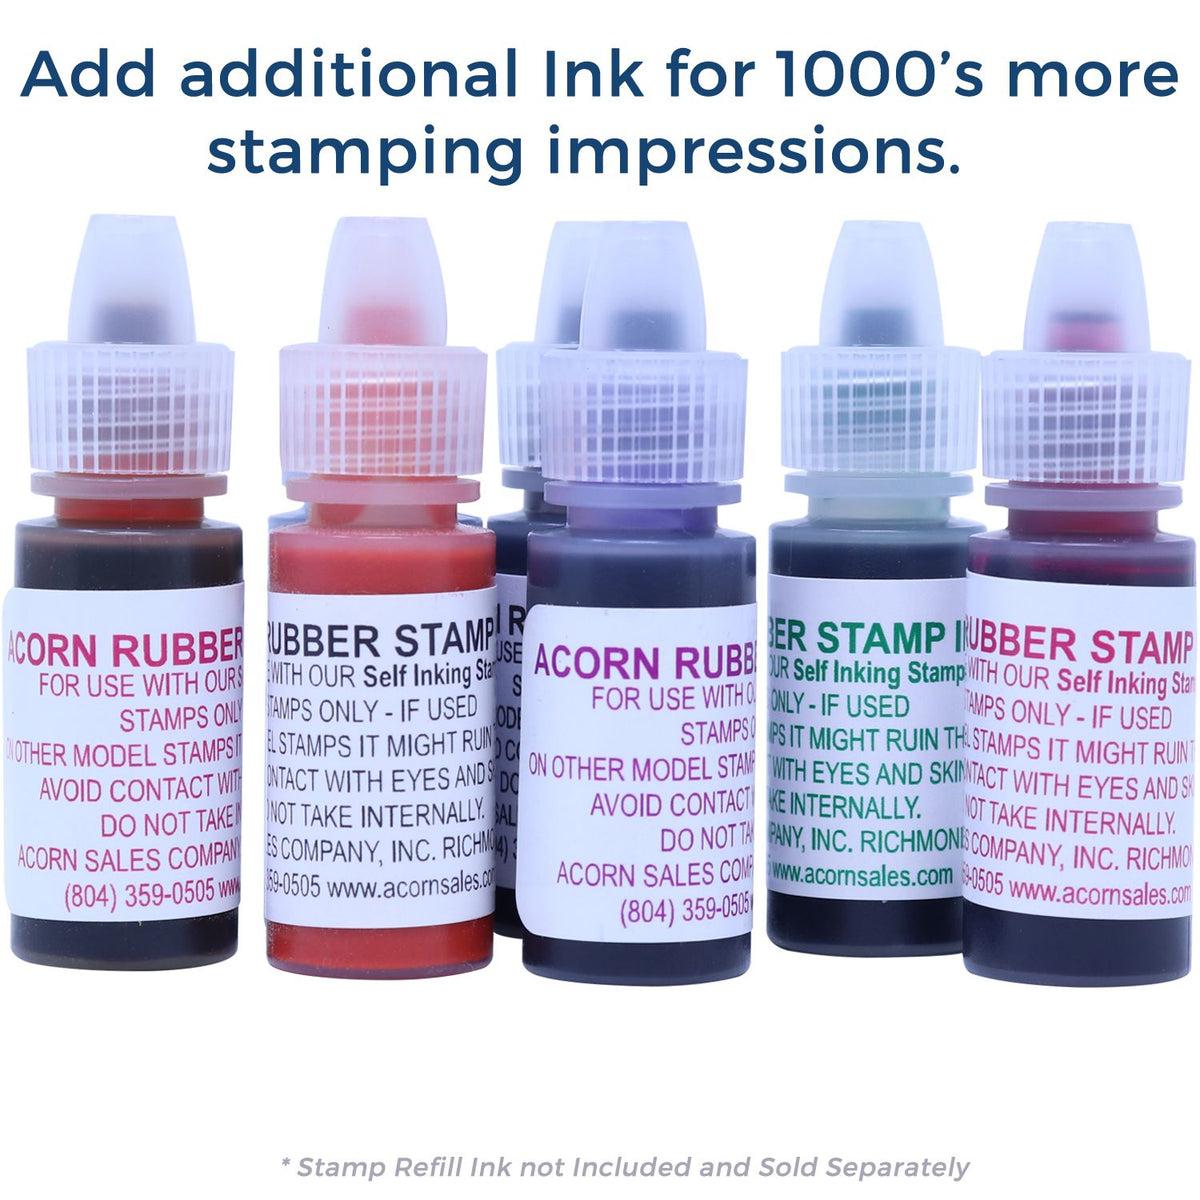 Refill Ink for Self-Inking Round Smiley with Hearts Stamp Available